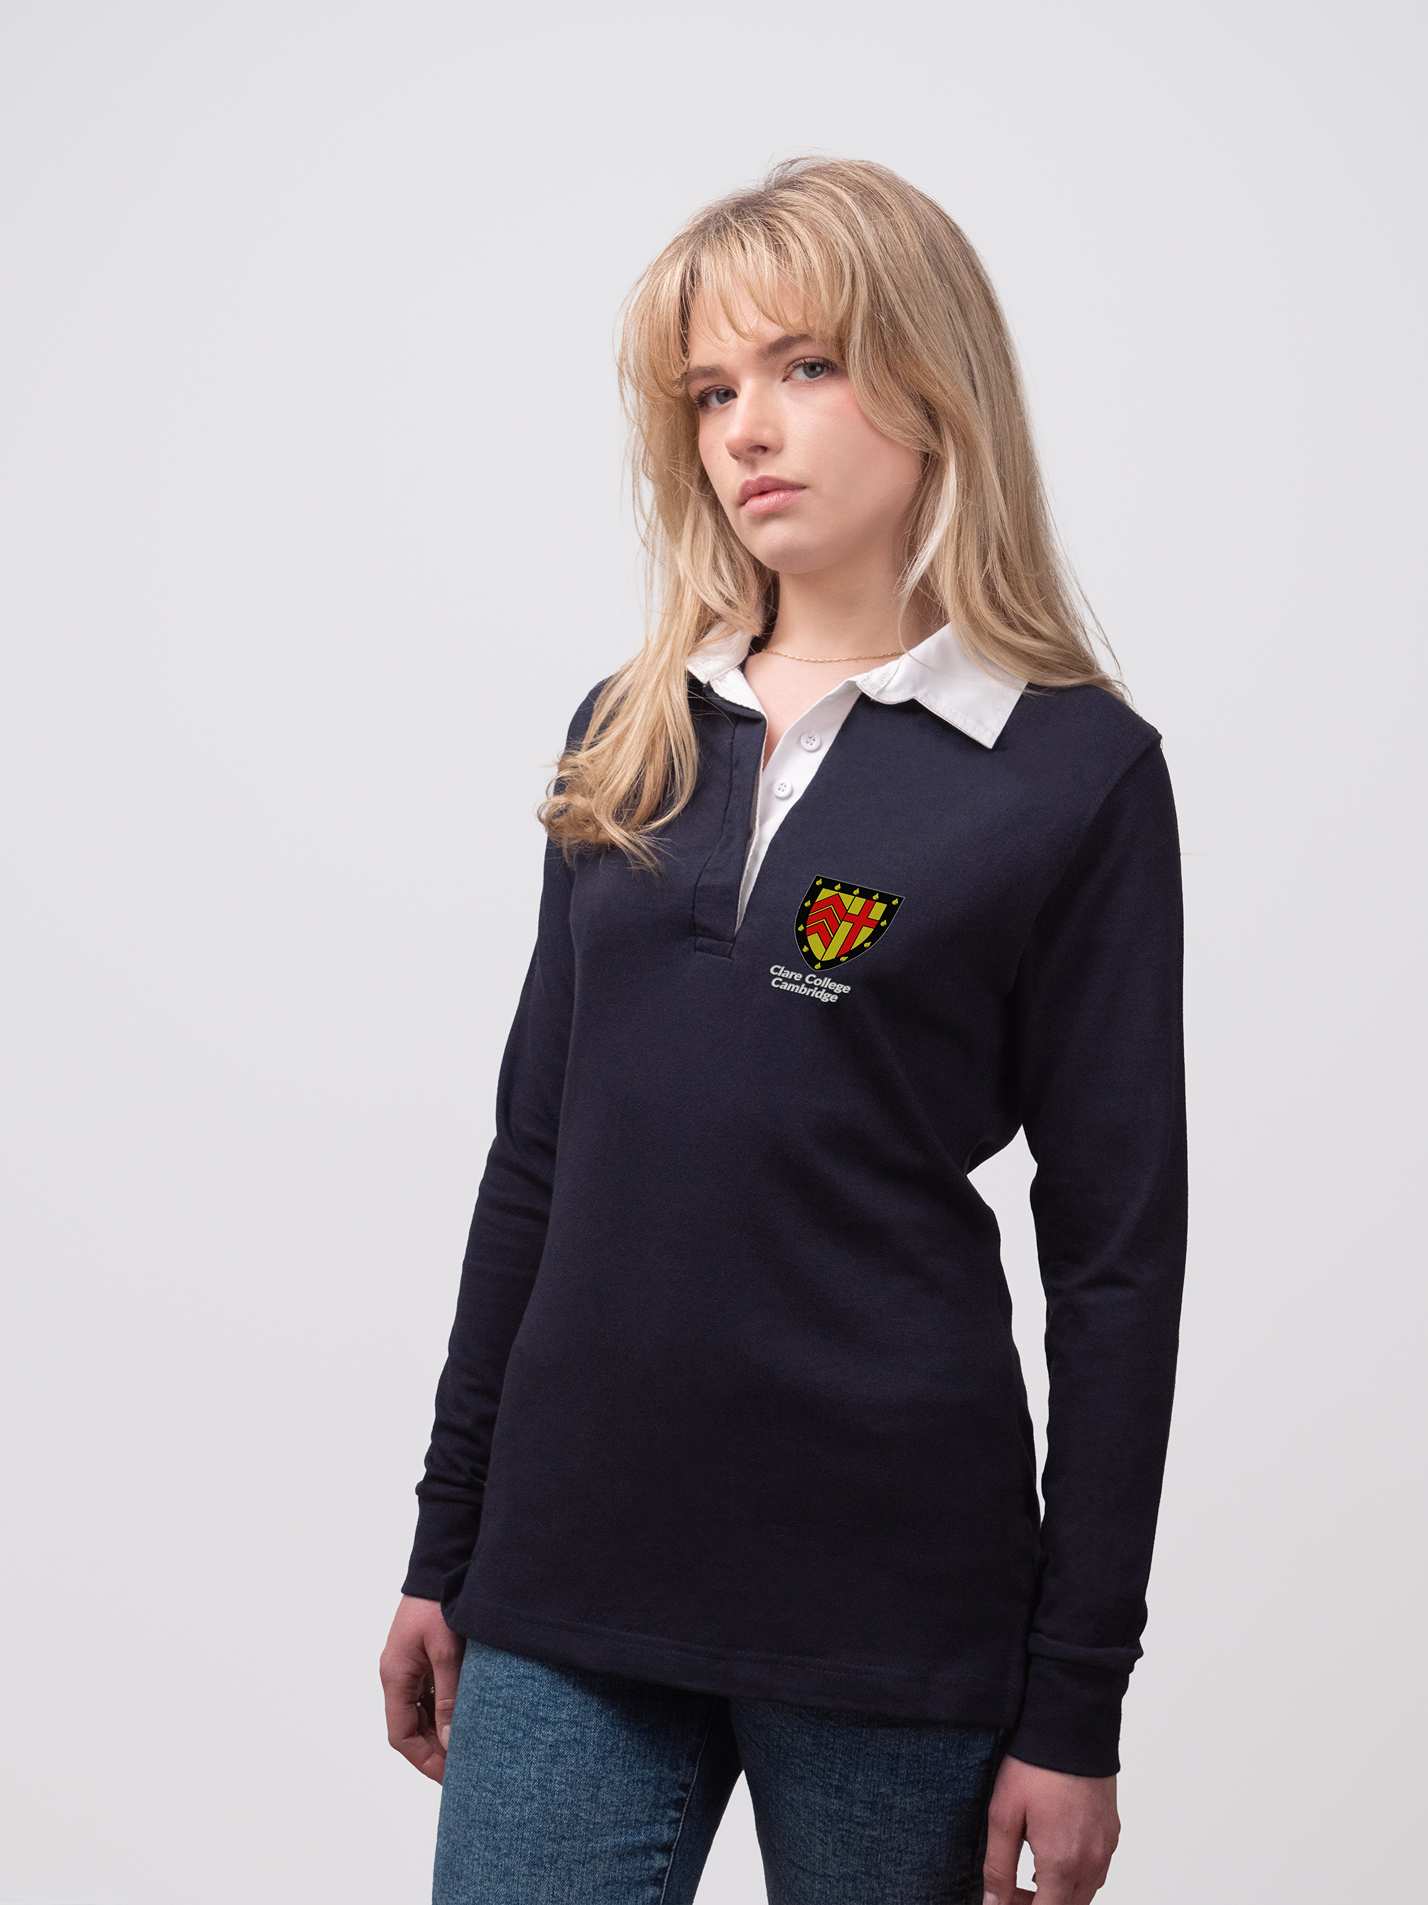 Student wearing a navy Clare College rugby shirt with embroidered crest